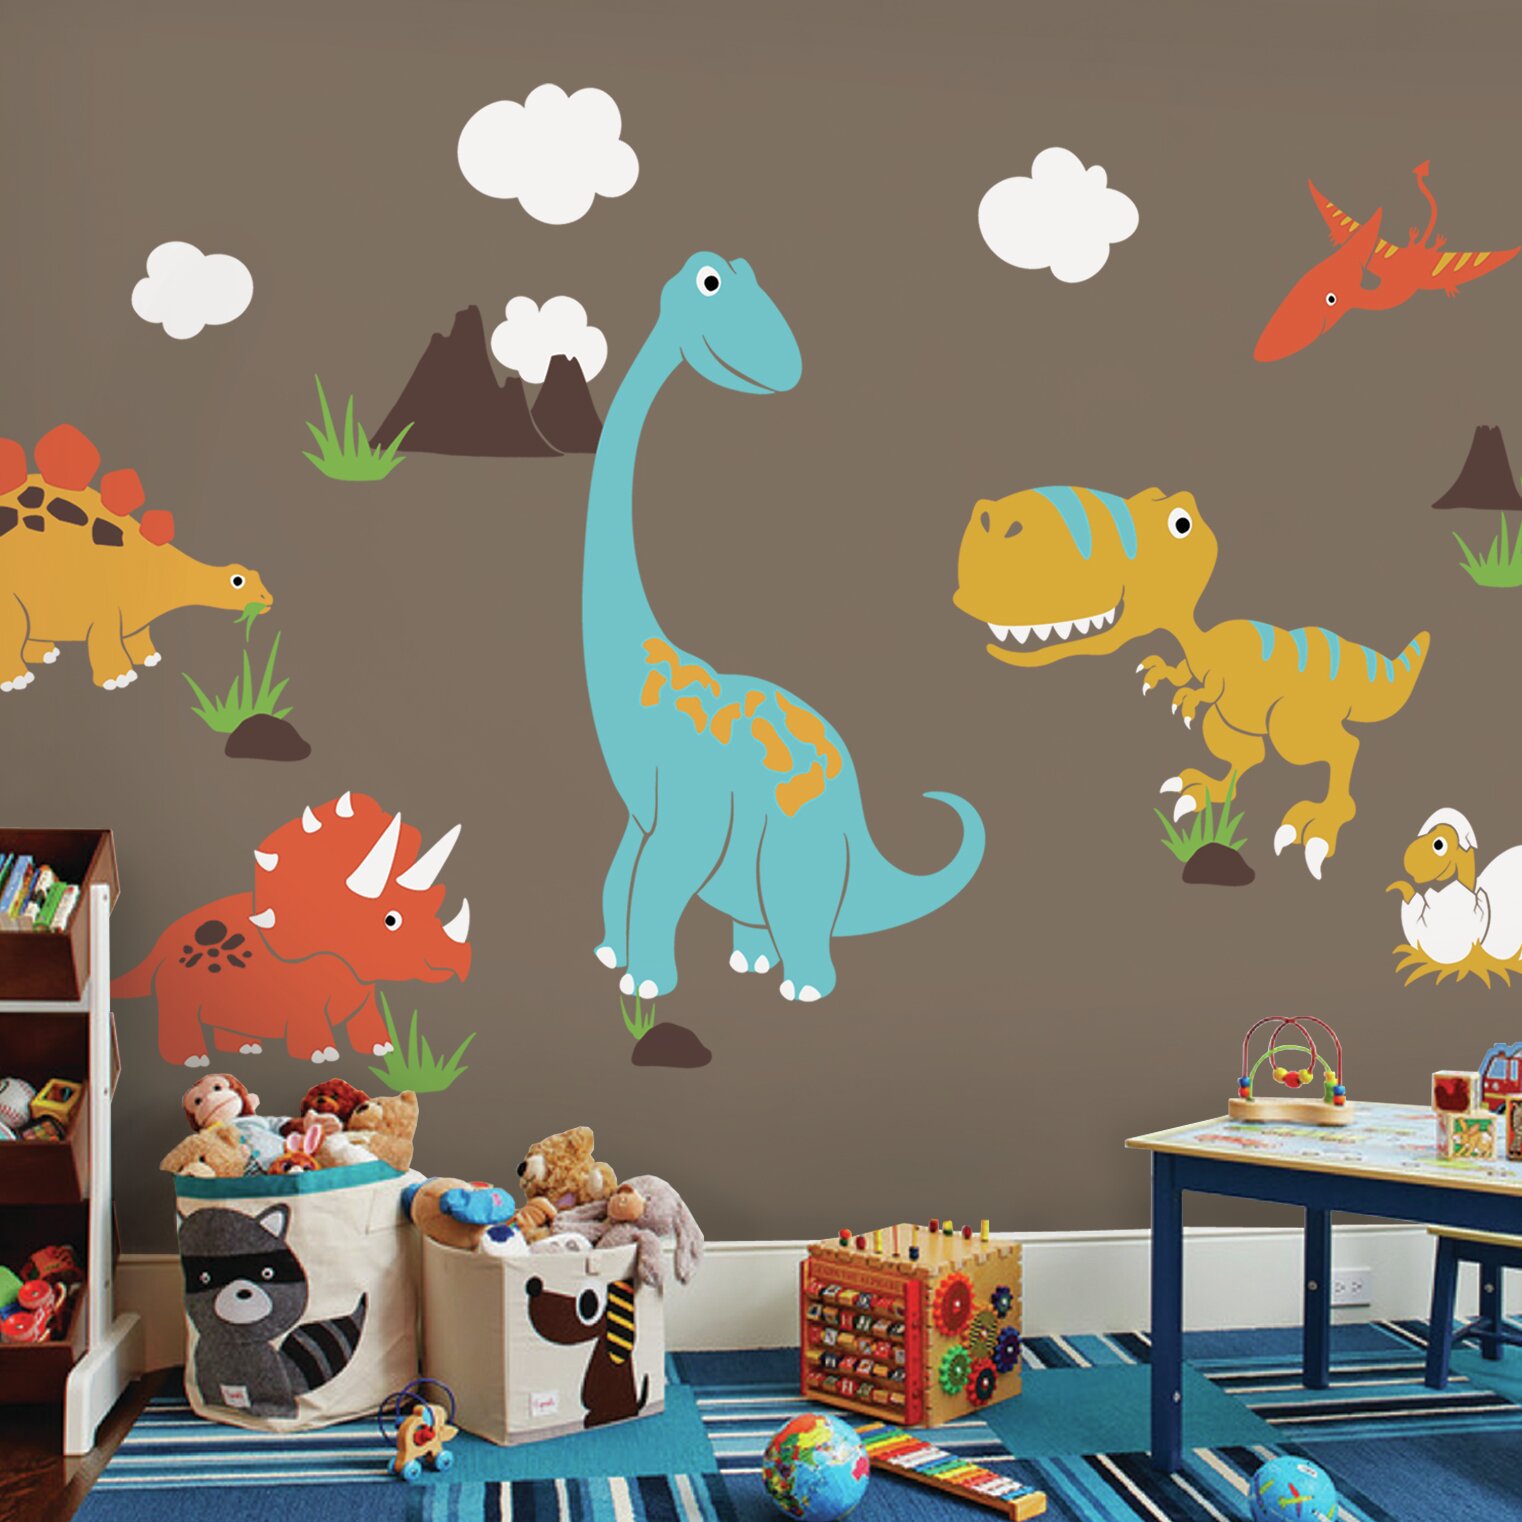 Supzone 3D Dinosaur Wall Sticker Dinosaur Head Wall Decals Vinyl Removable Wall Decor Watercolour Wall Decal Opening Mouth Dinosaurios Wall Art for Bedroom Playroom Living Room Wall Mural Sticker